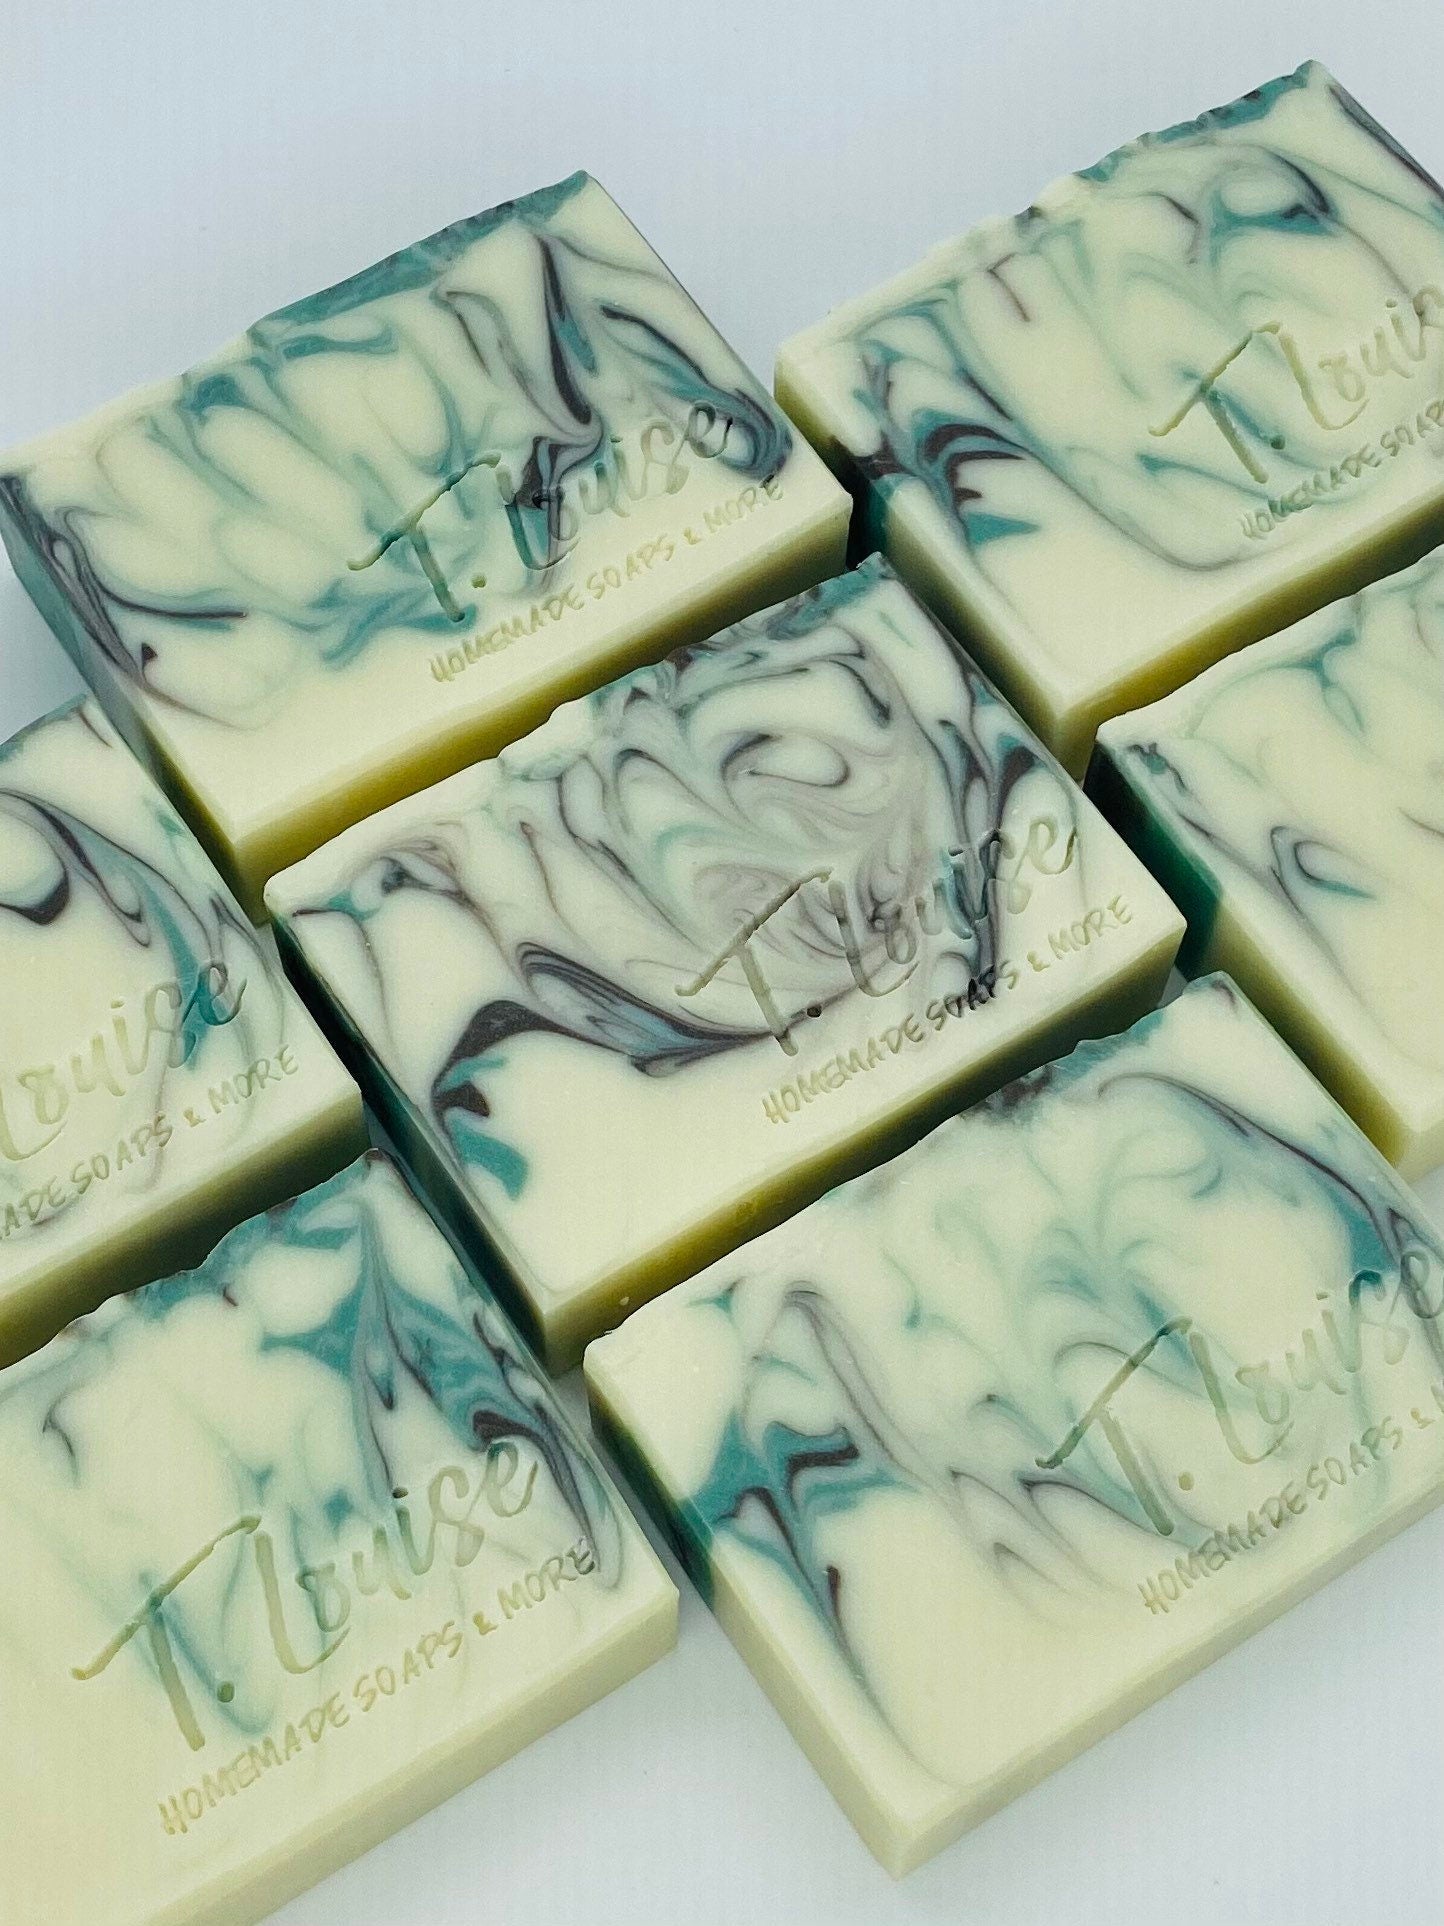 Willow and Ivy handmade soap